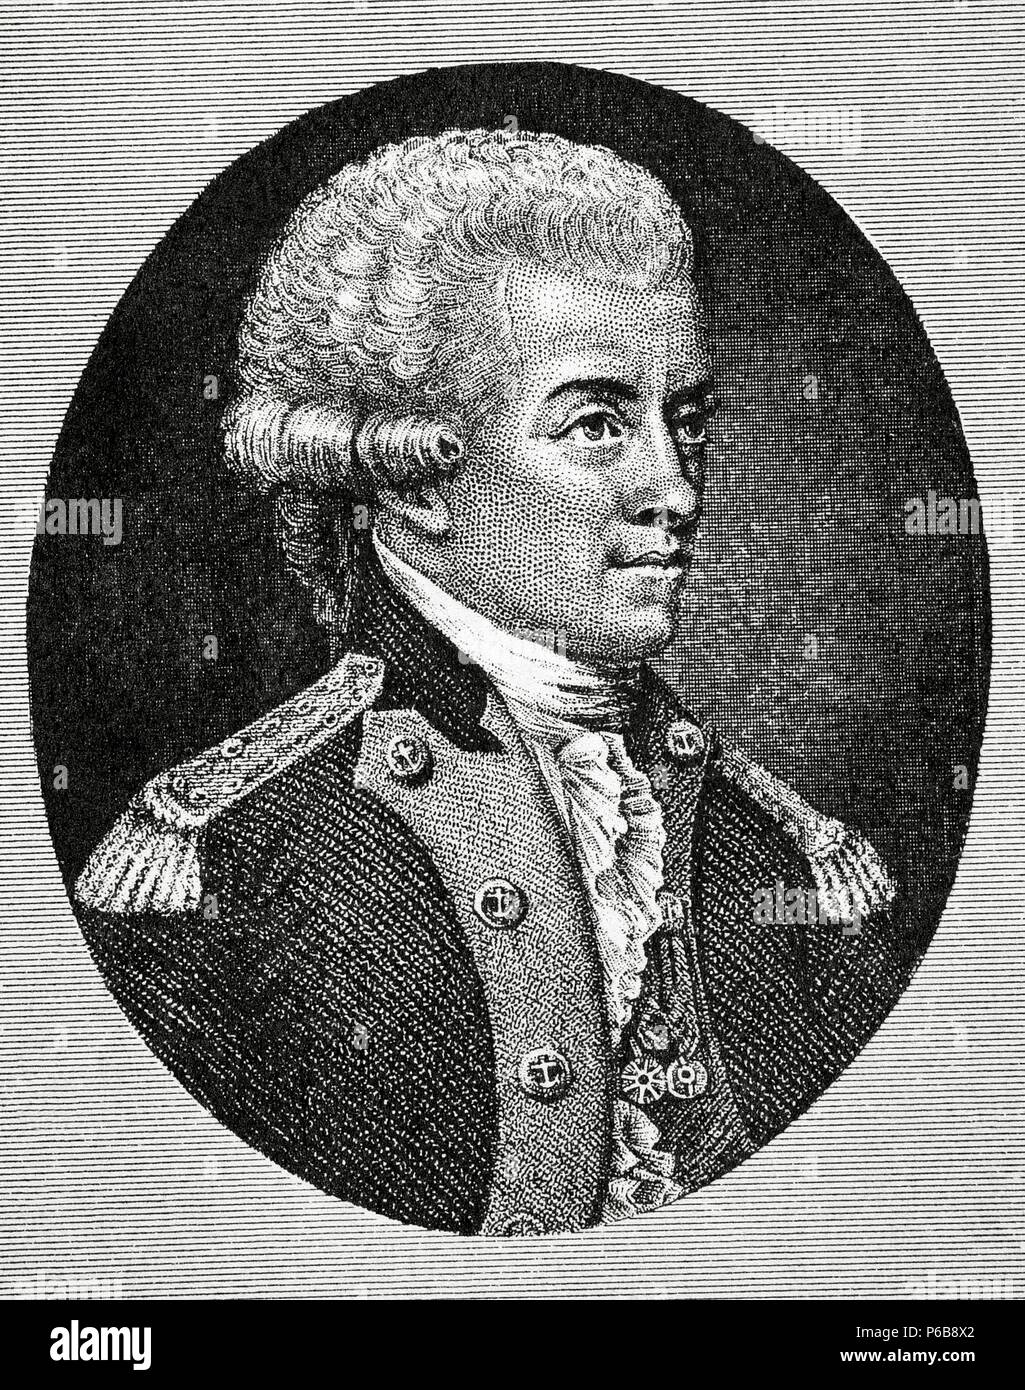 John Paul Jones (1747-1792). Scottish sailor and the United States's first well-known naval fighter in the American Revolution. Engraving. Stock Photo